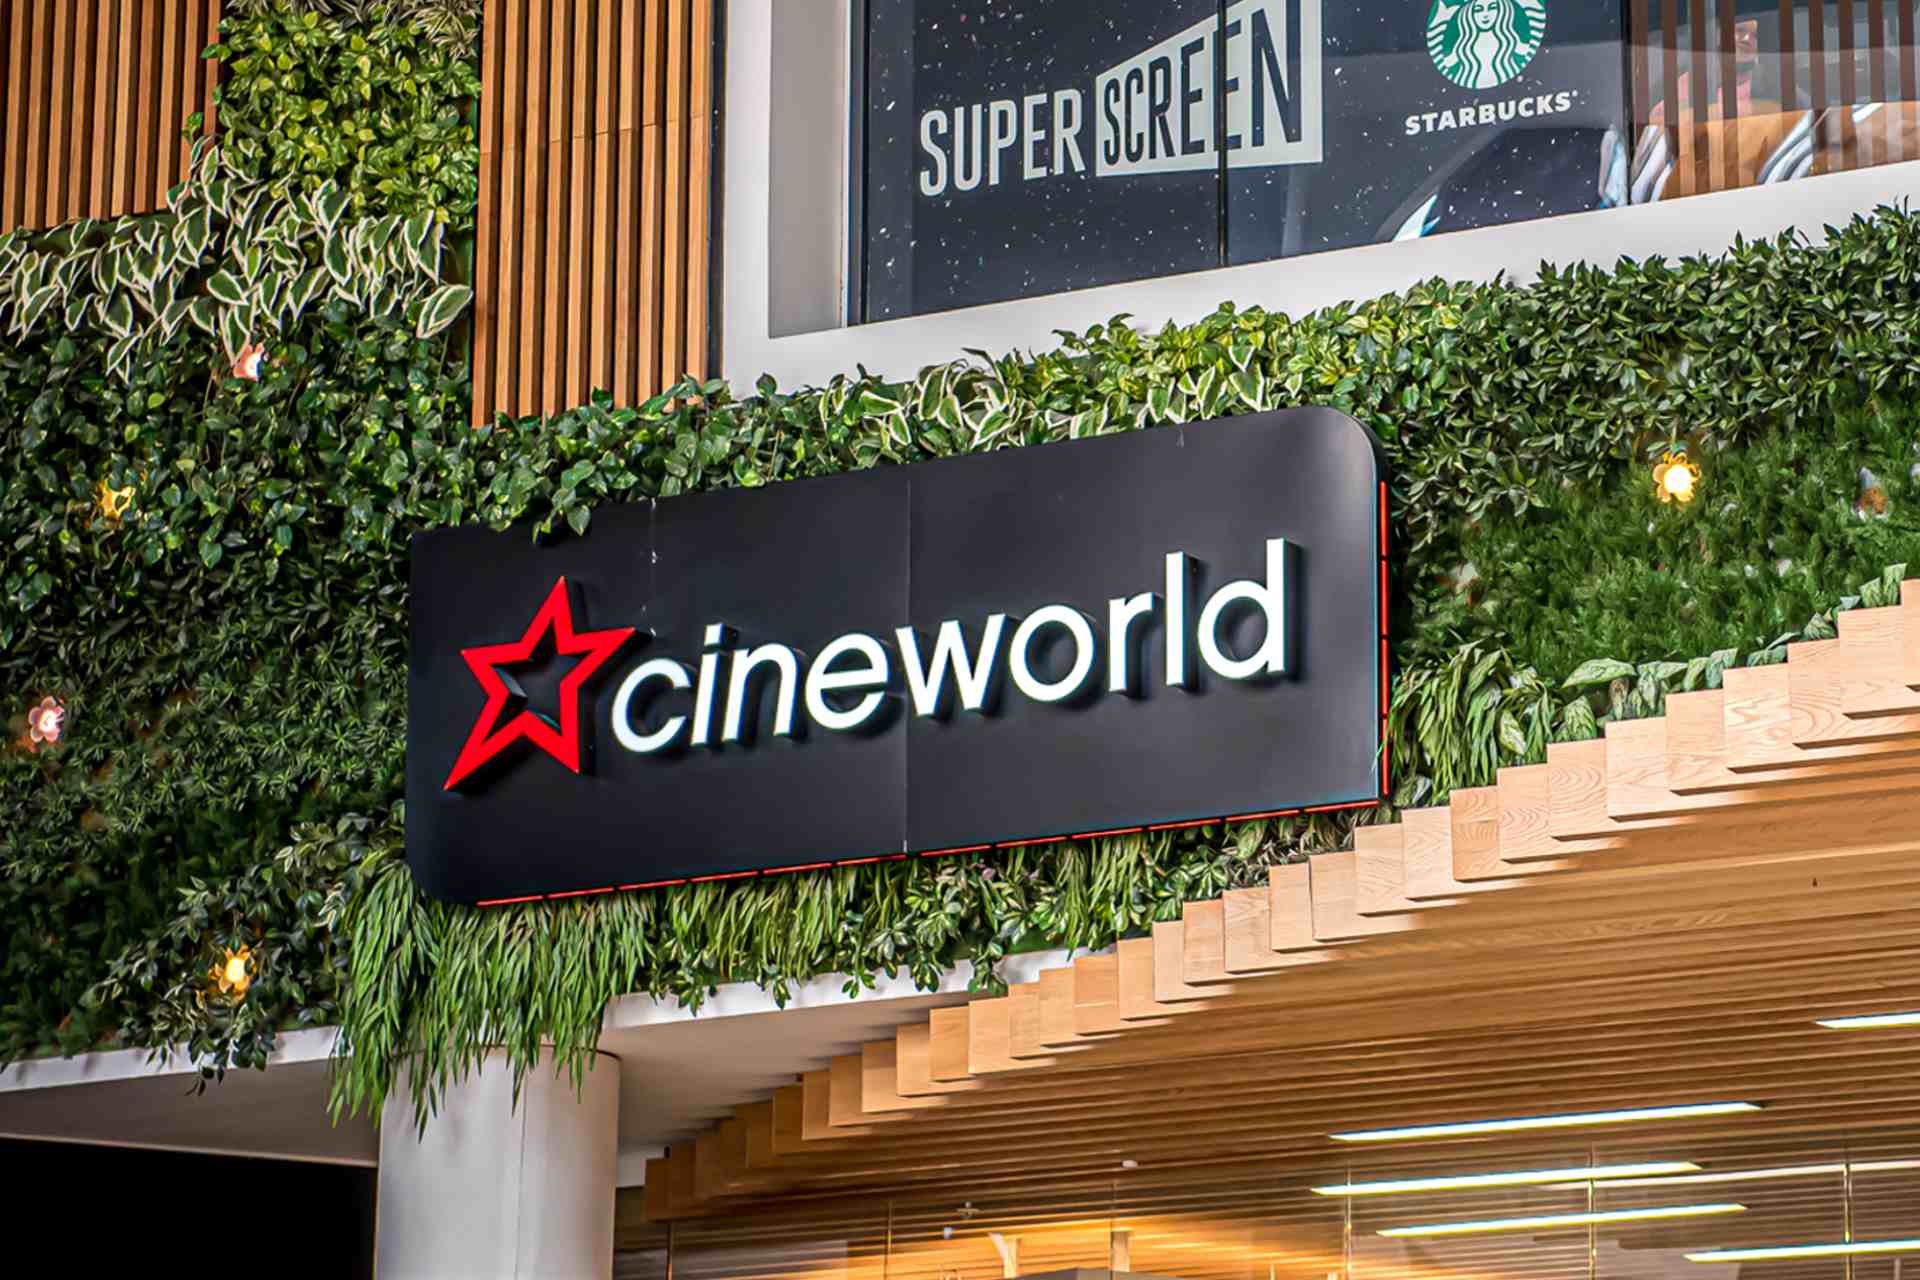 Black Cineworld sign hanging on wall with wooden cladding and green leafy decoration.